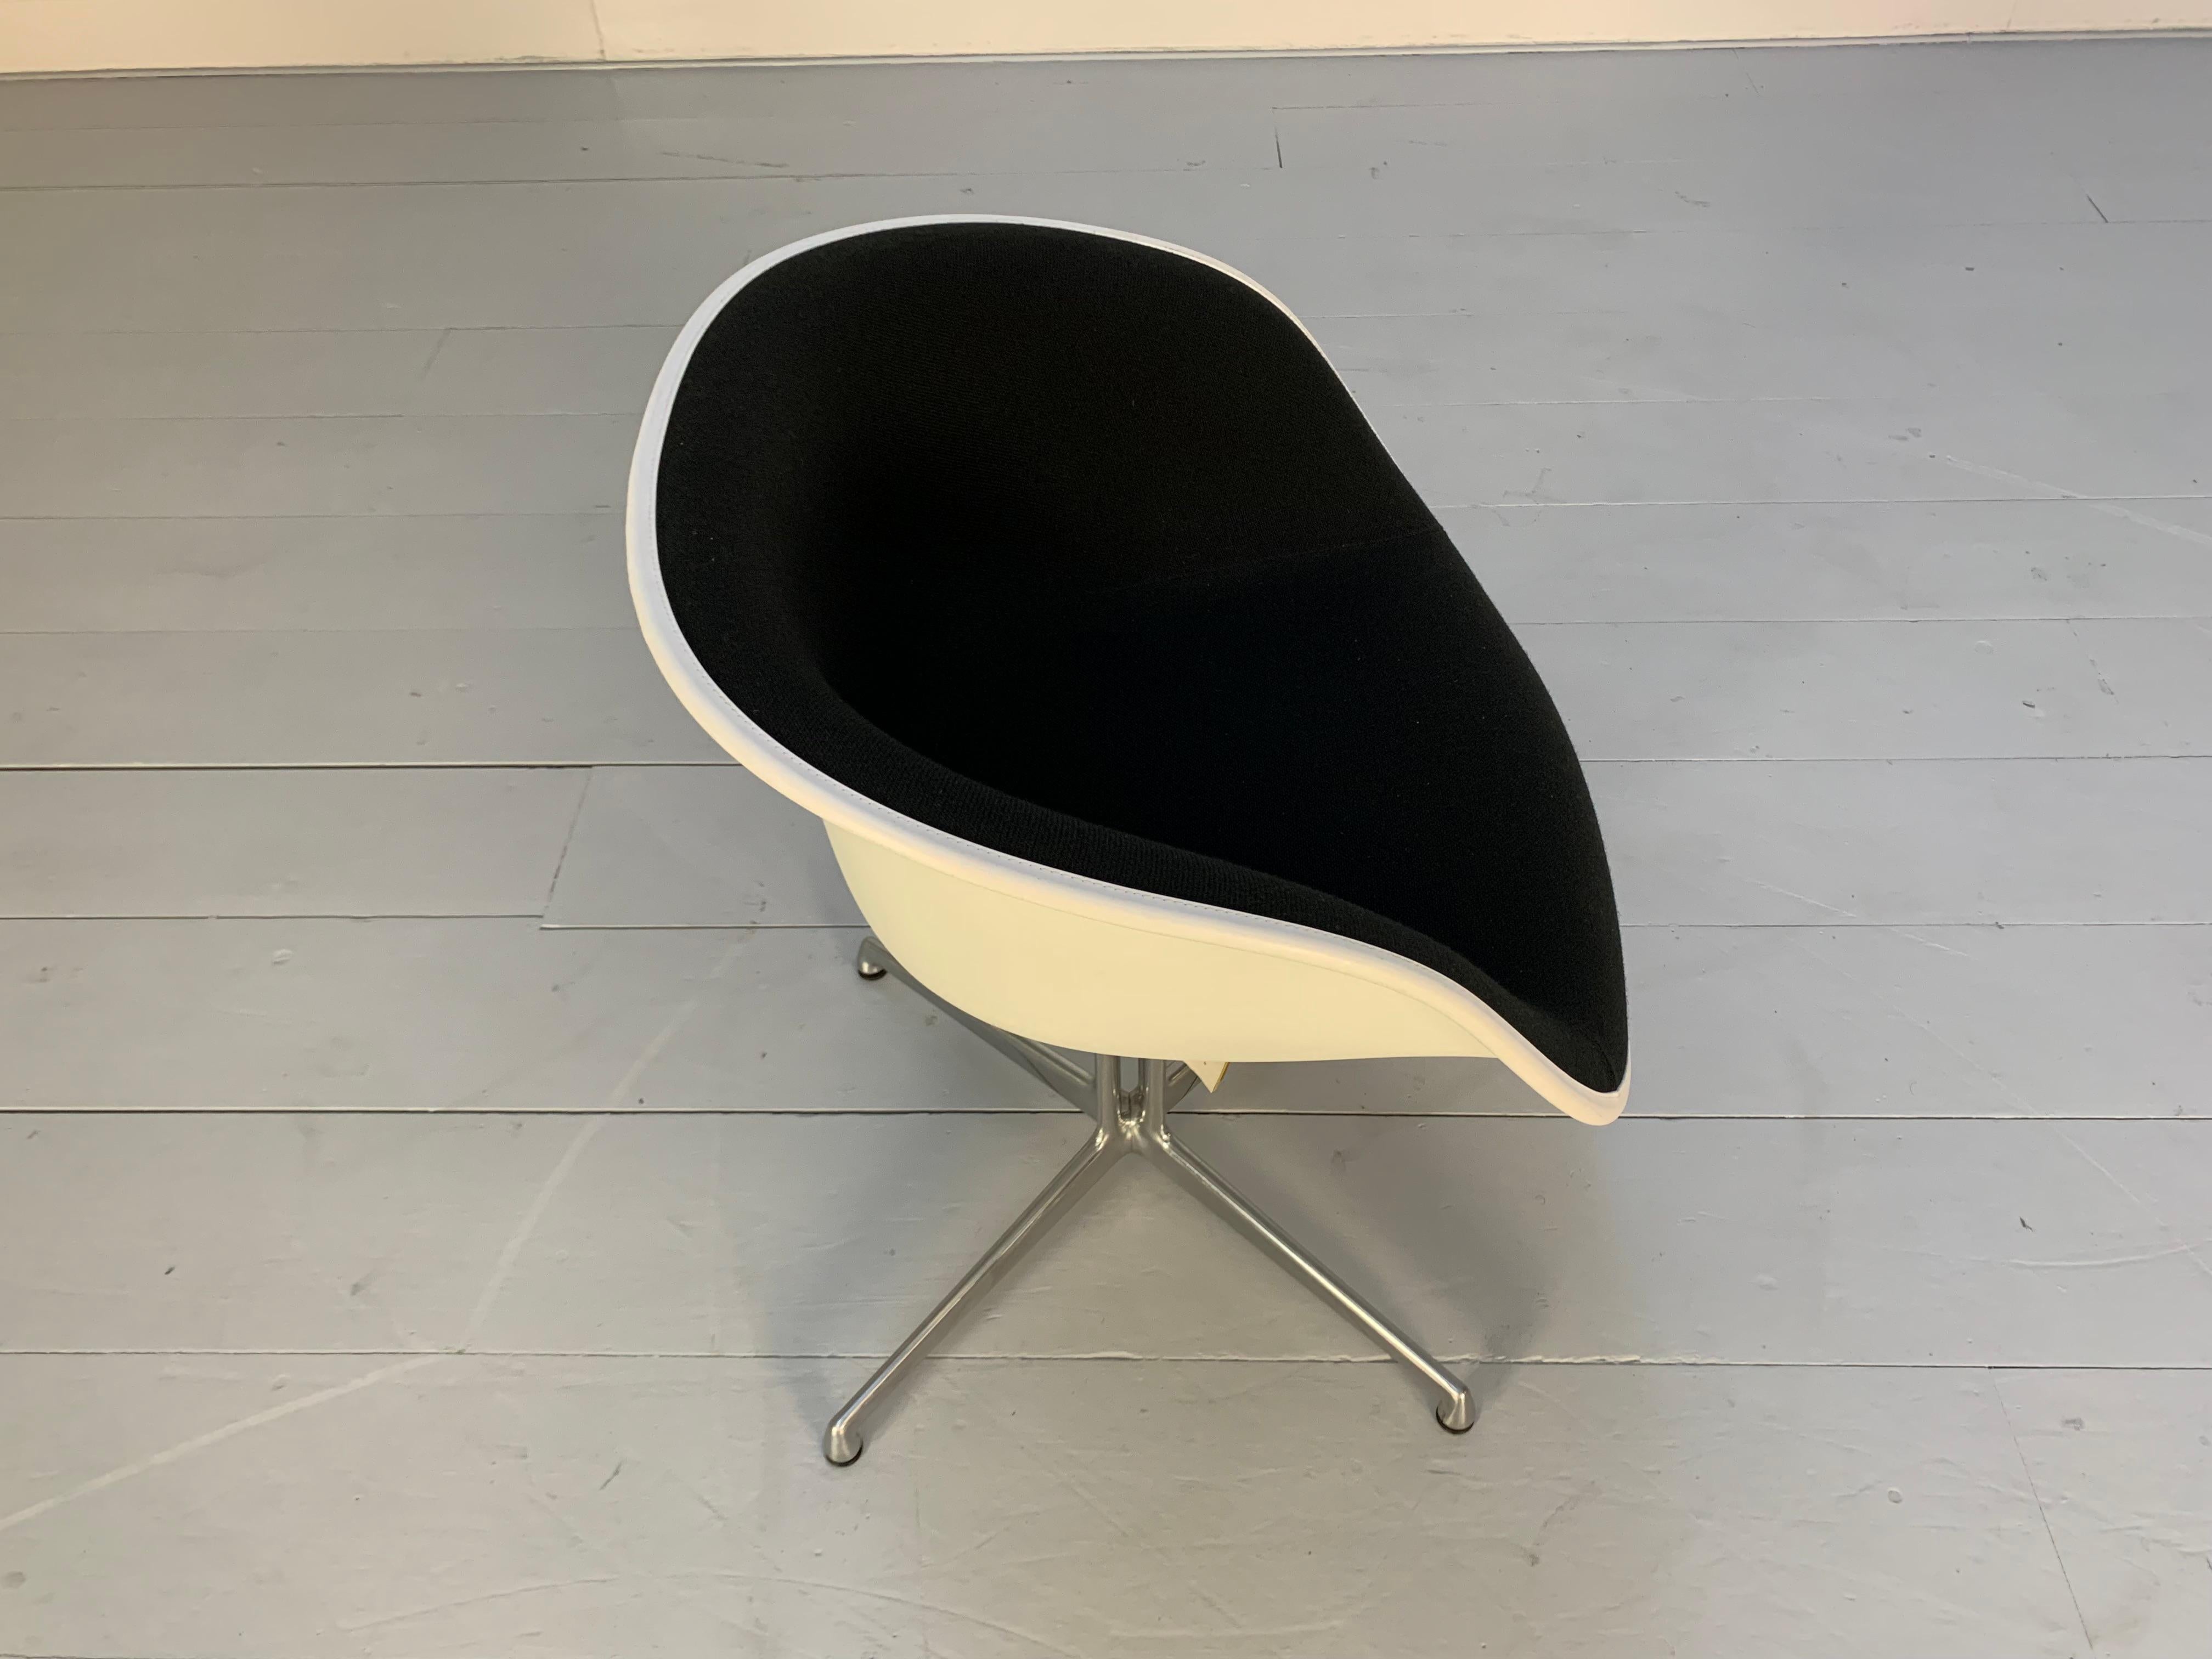 Vitra “La Fonda” Eames Chair & Marble Table in Black Hopsack For Sale 8